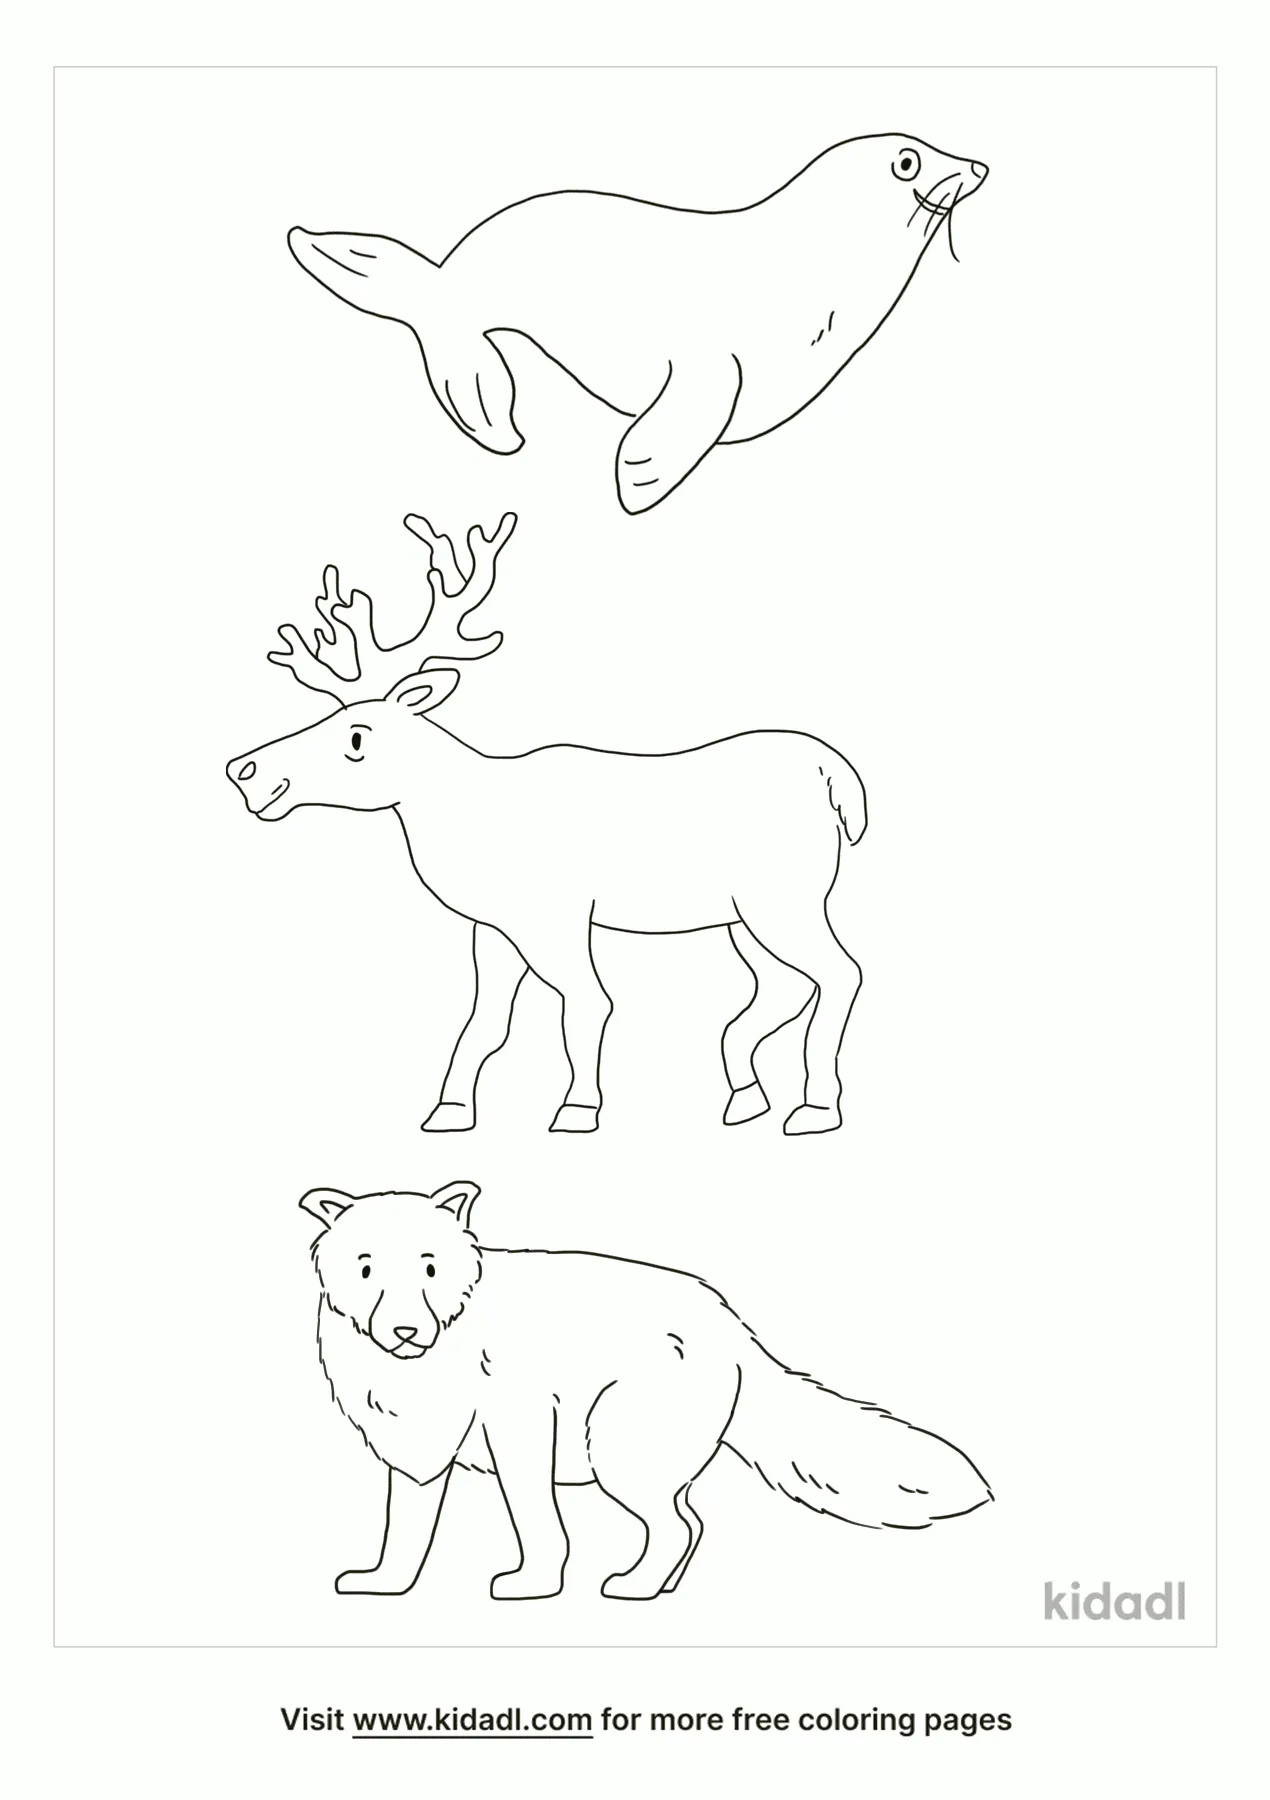 Free Tundra Animals Coloring Page | Coloring Page Printables | Kidadl